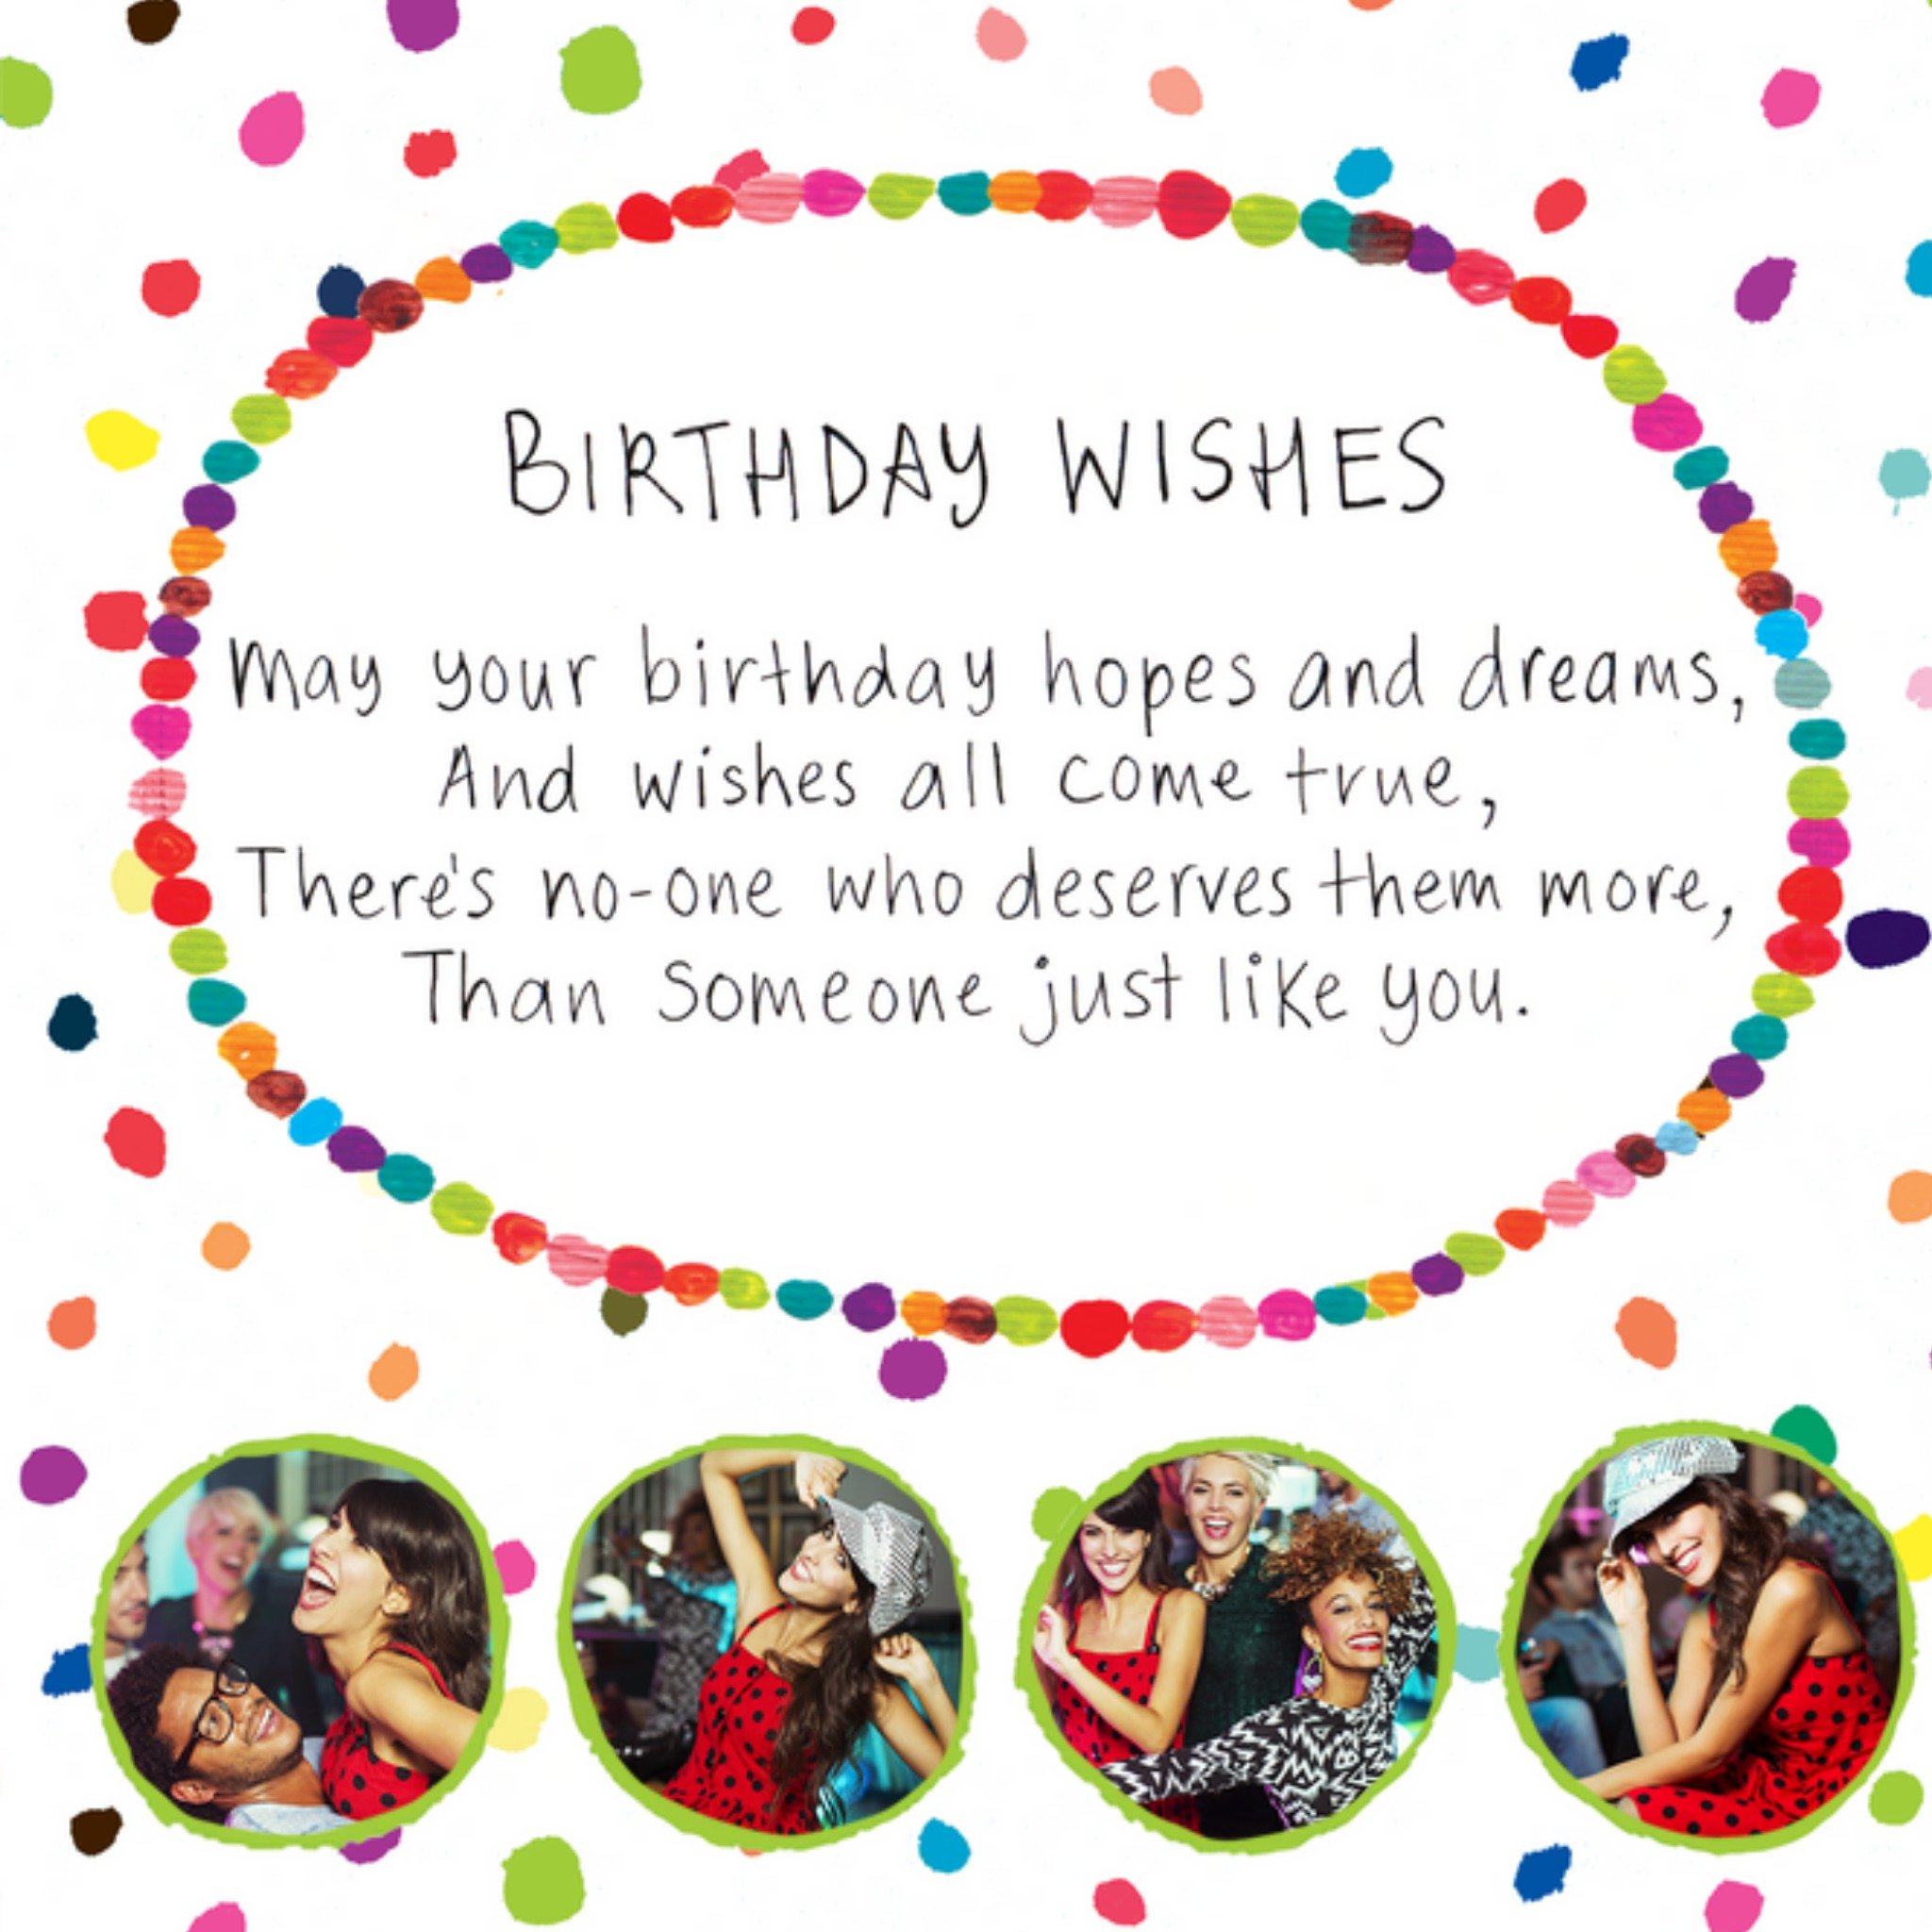 The Dogs Doo-Dahs Hopes And Dreams Photo Upload Birthday Card, Square